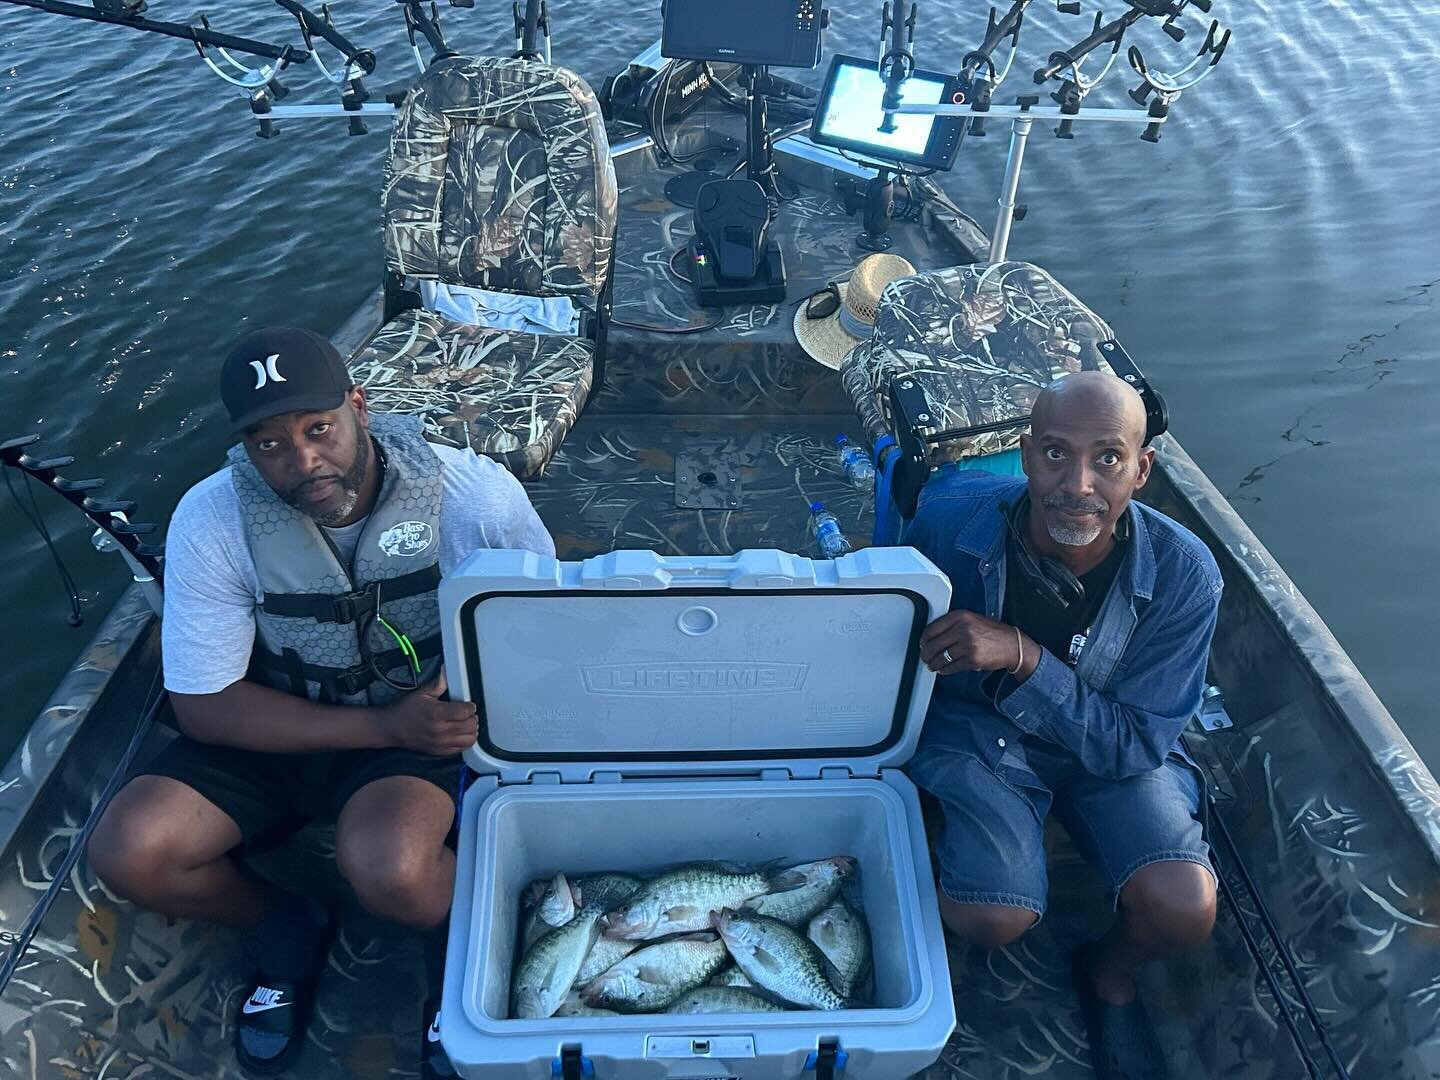 Always a great day when OG clients and fishing buddies come out! Thanks for putting them on fish Capt. Kirby! #bartonoutfitters #littleqranch #franklinfishingtours #jigsbyjay #tinyshandtiedhairjigs